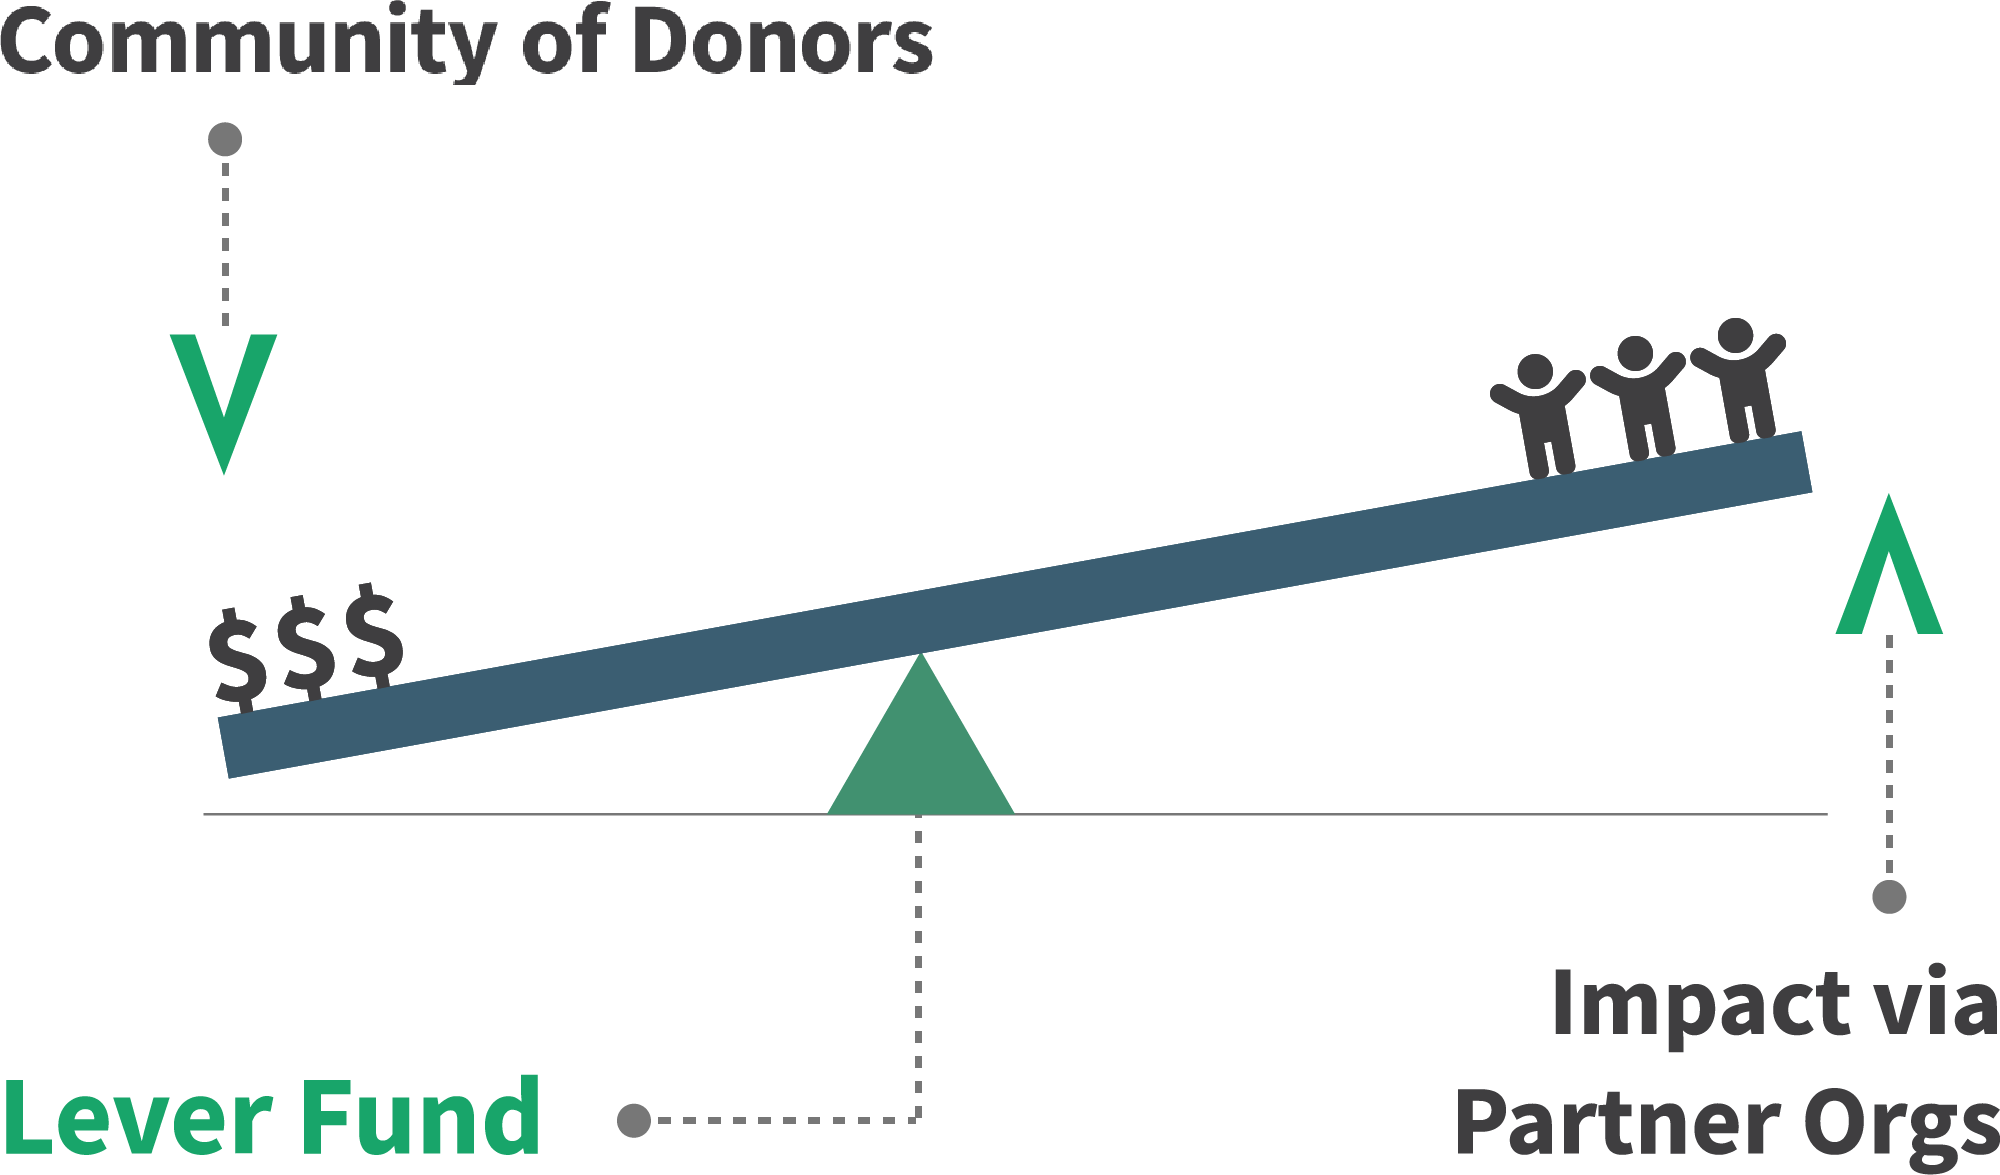 The impact of a community of donors via a partner organization and Lever Fund - stage 2